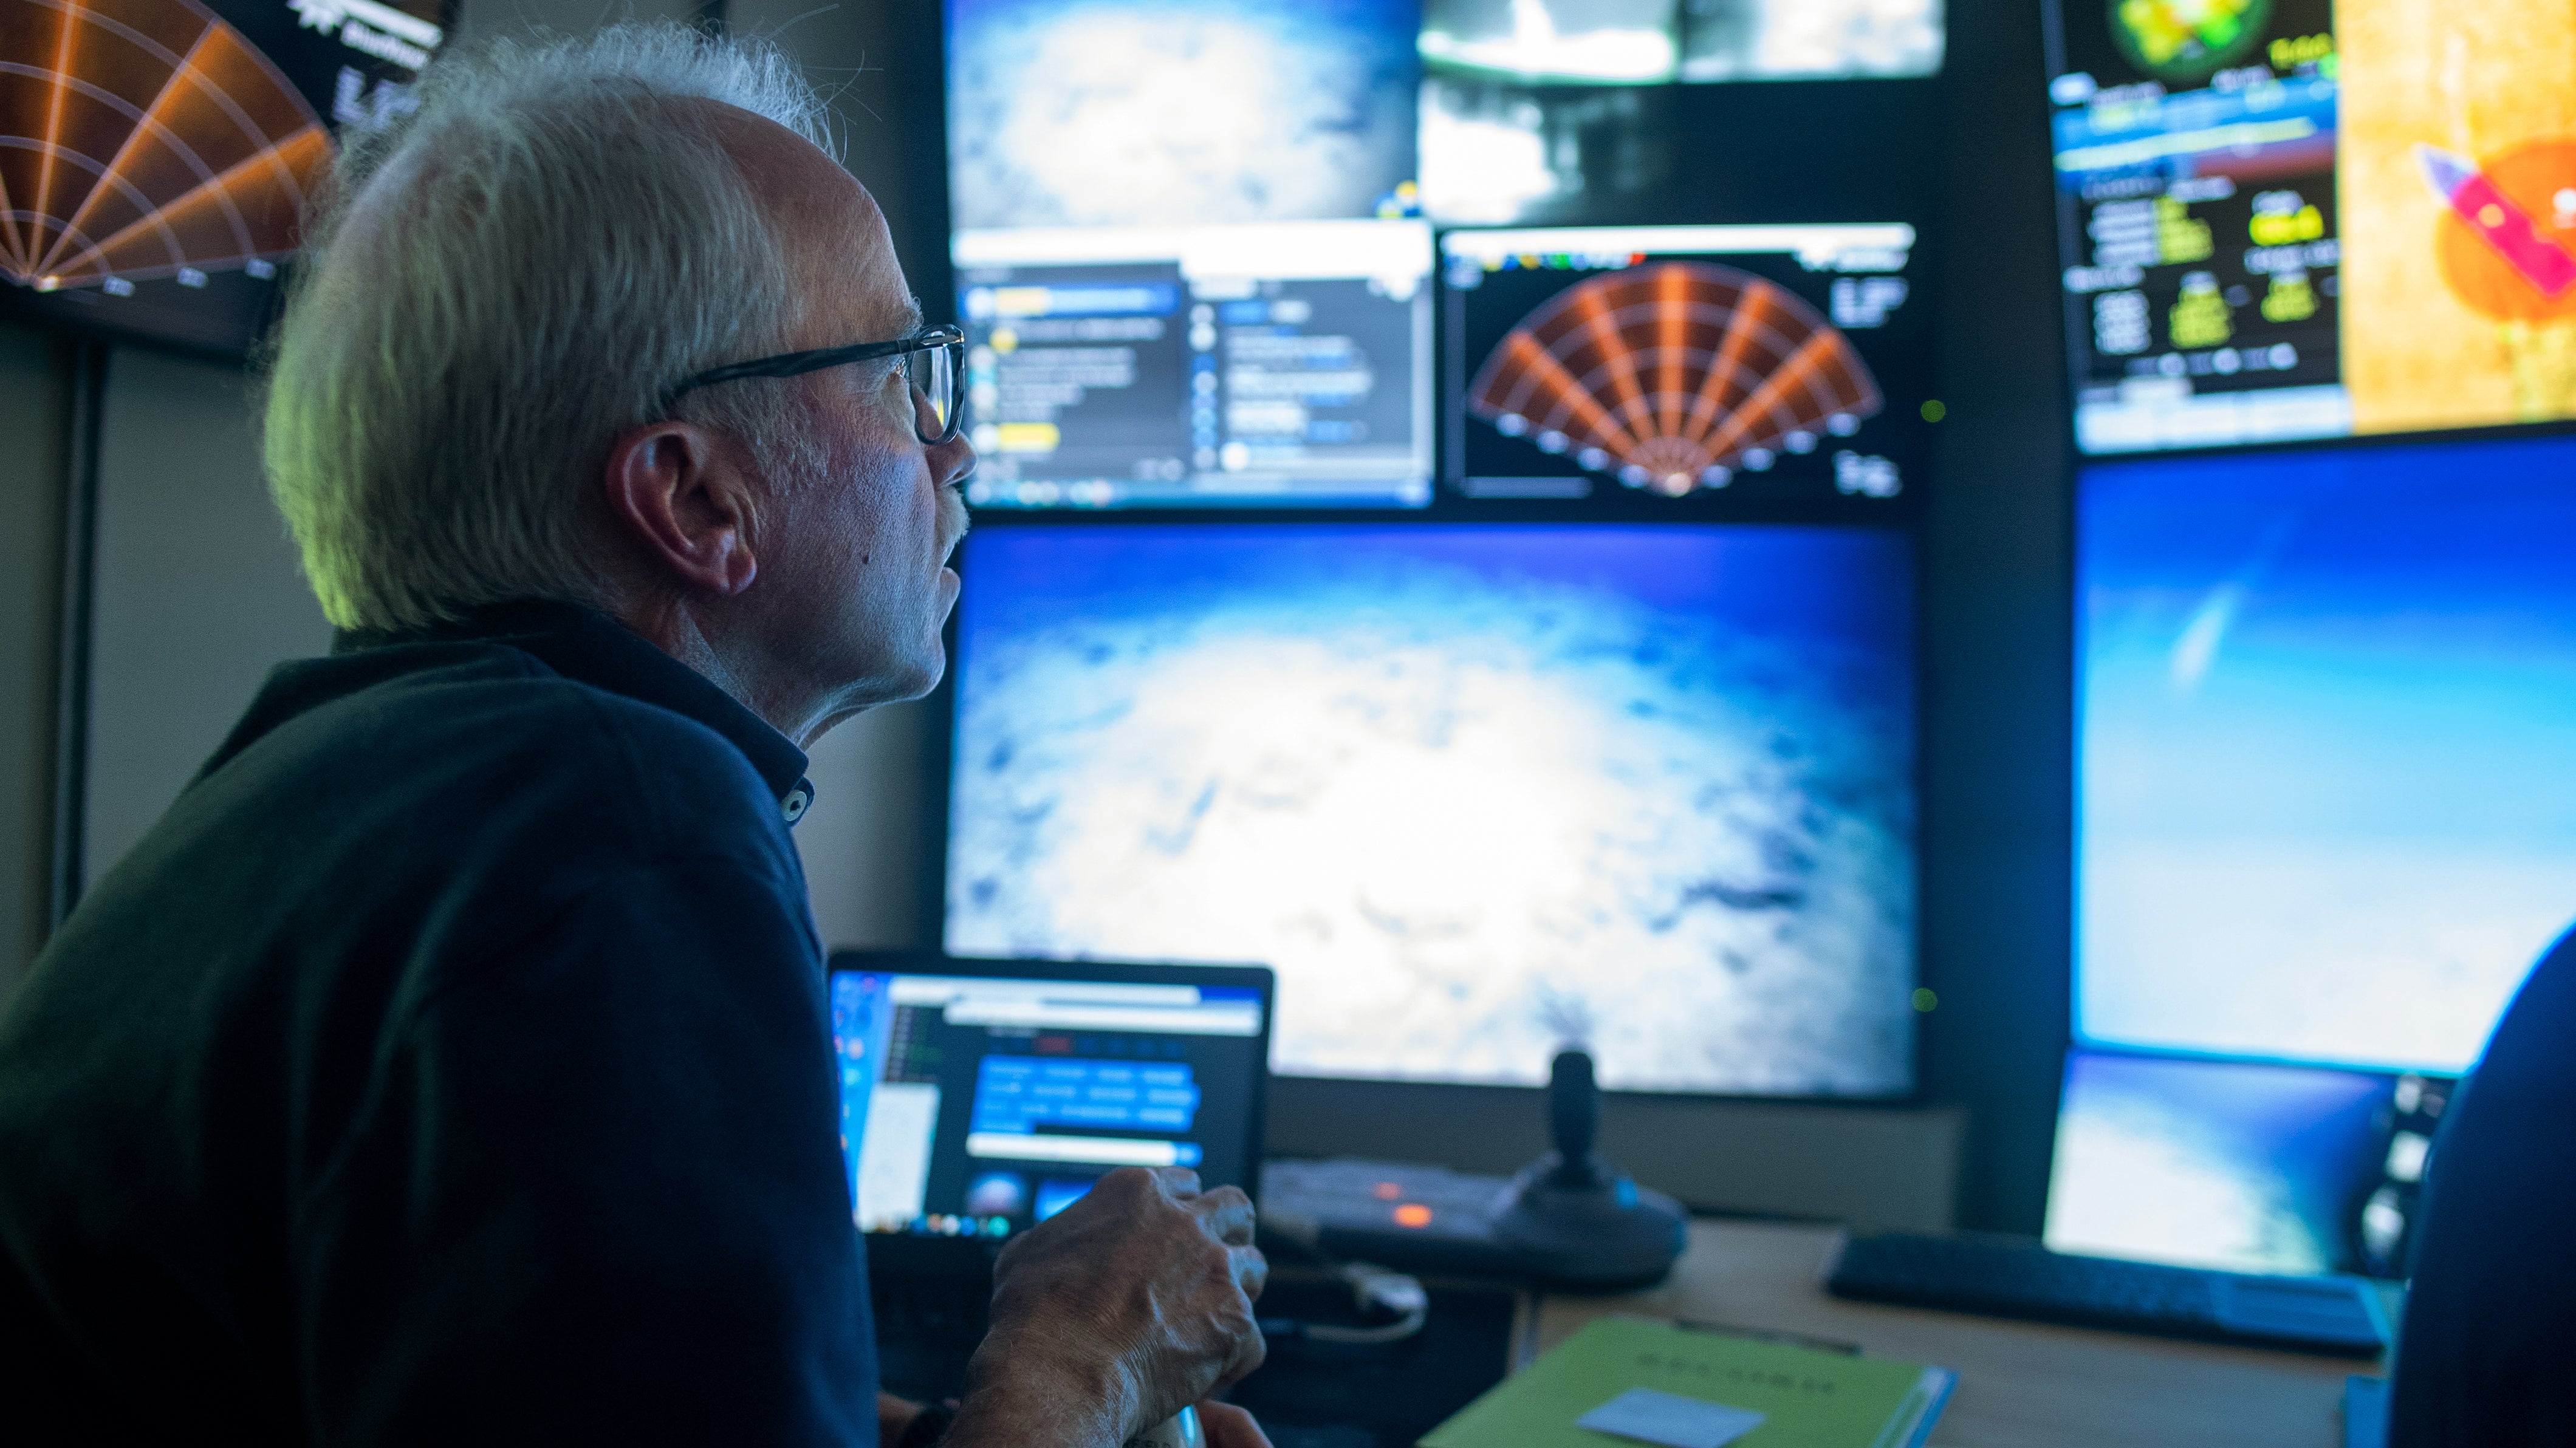 David Butterfield of the University of Washington looks at video feeds coming in from the ROV.  (Photo: Mónika Naranjo-Shepherd / Schmidt Ocean Institute)